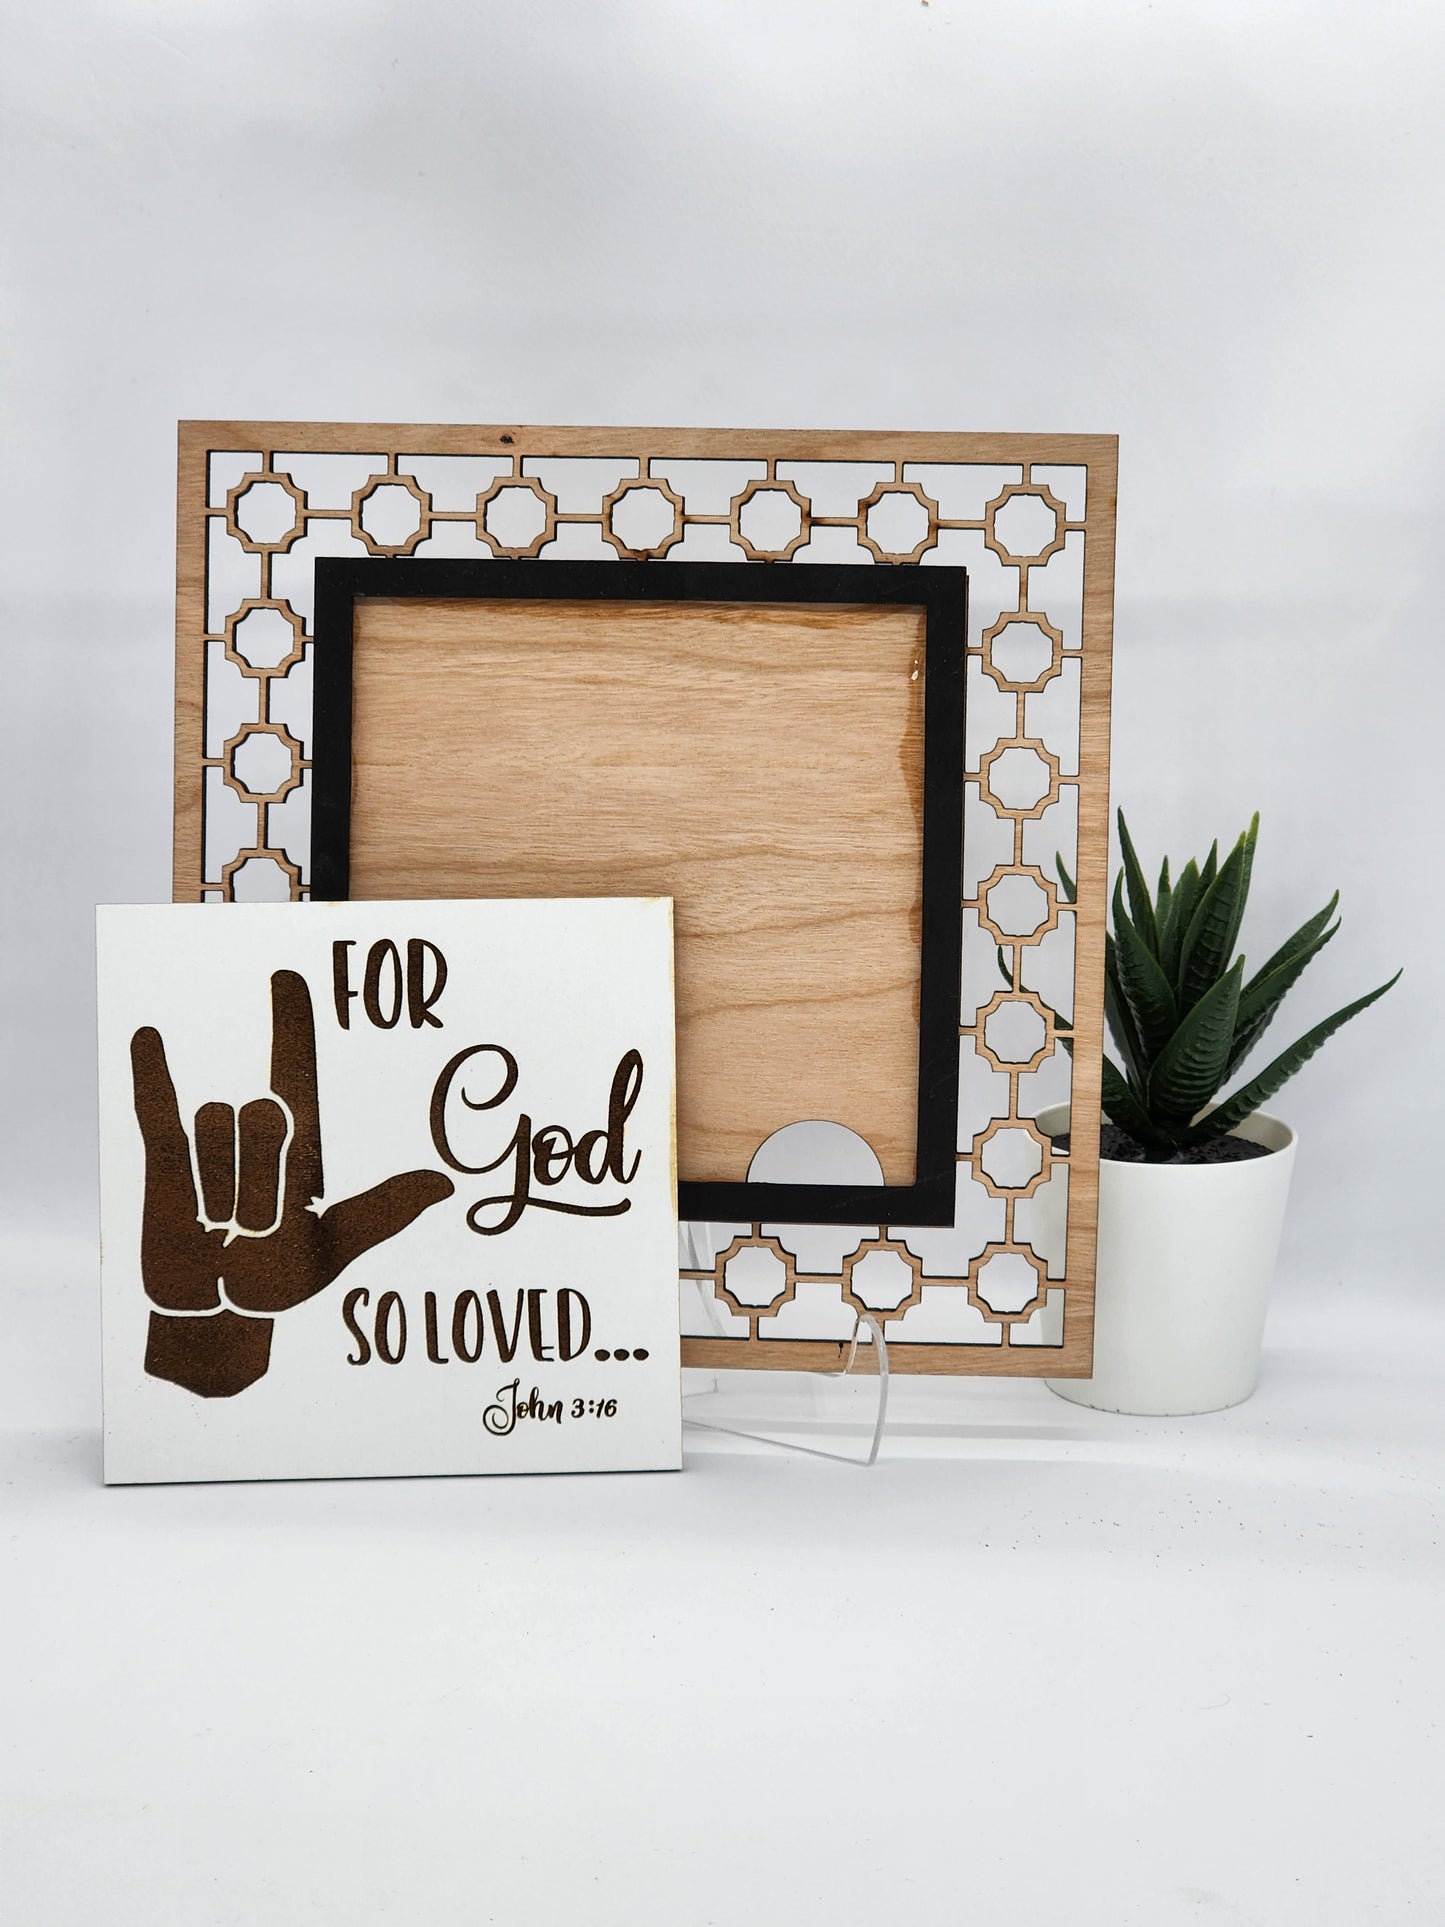 "For God so Loved..." in Sign Language Frame and Insert